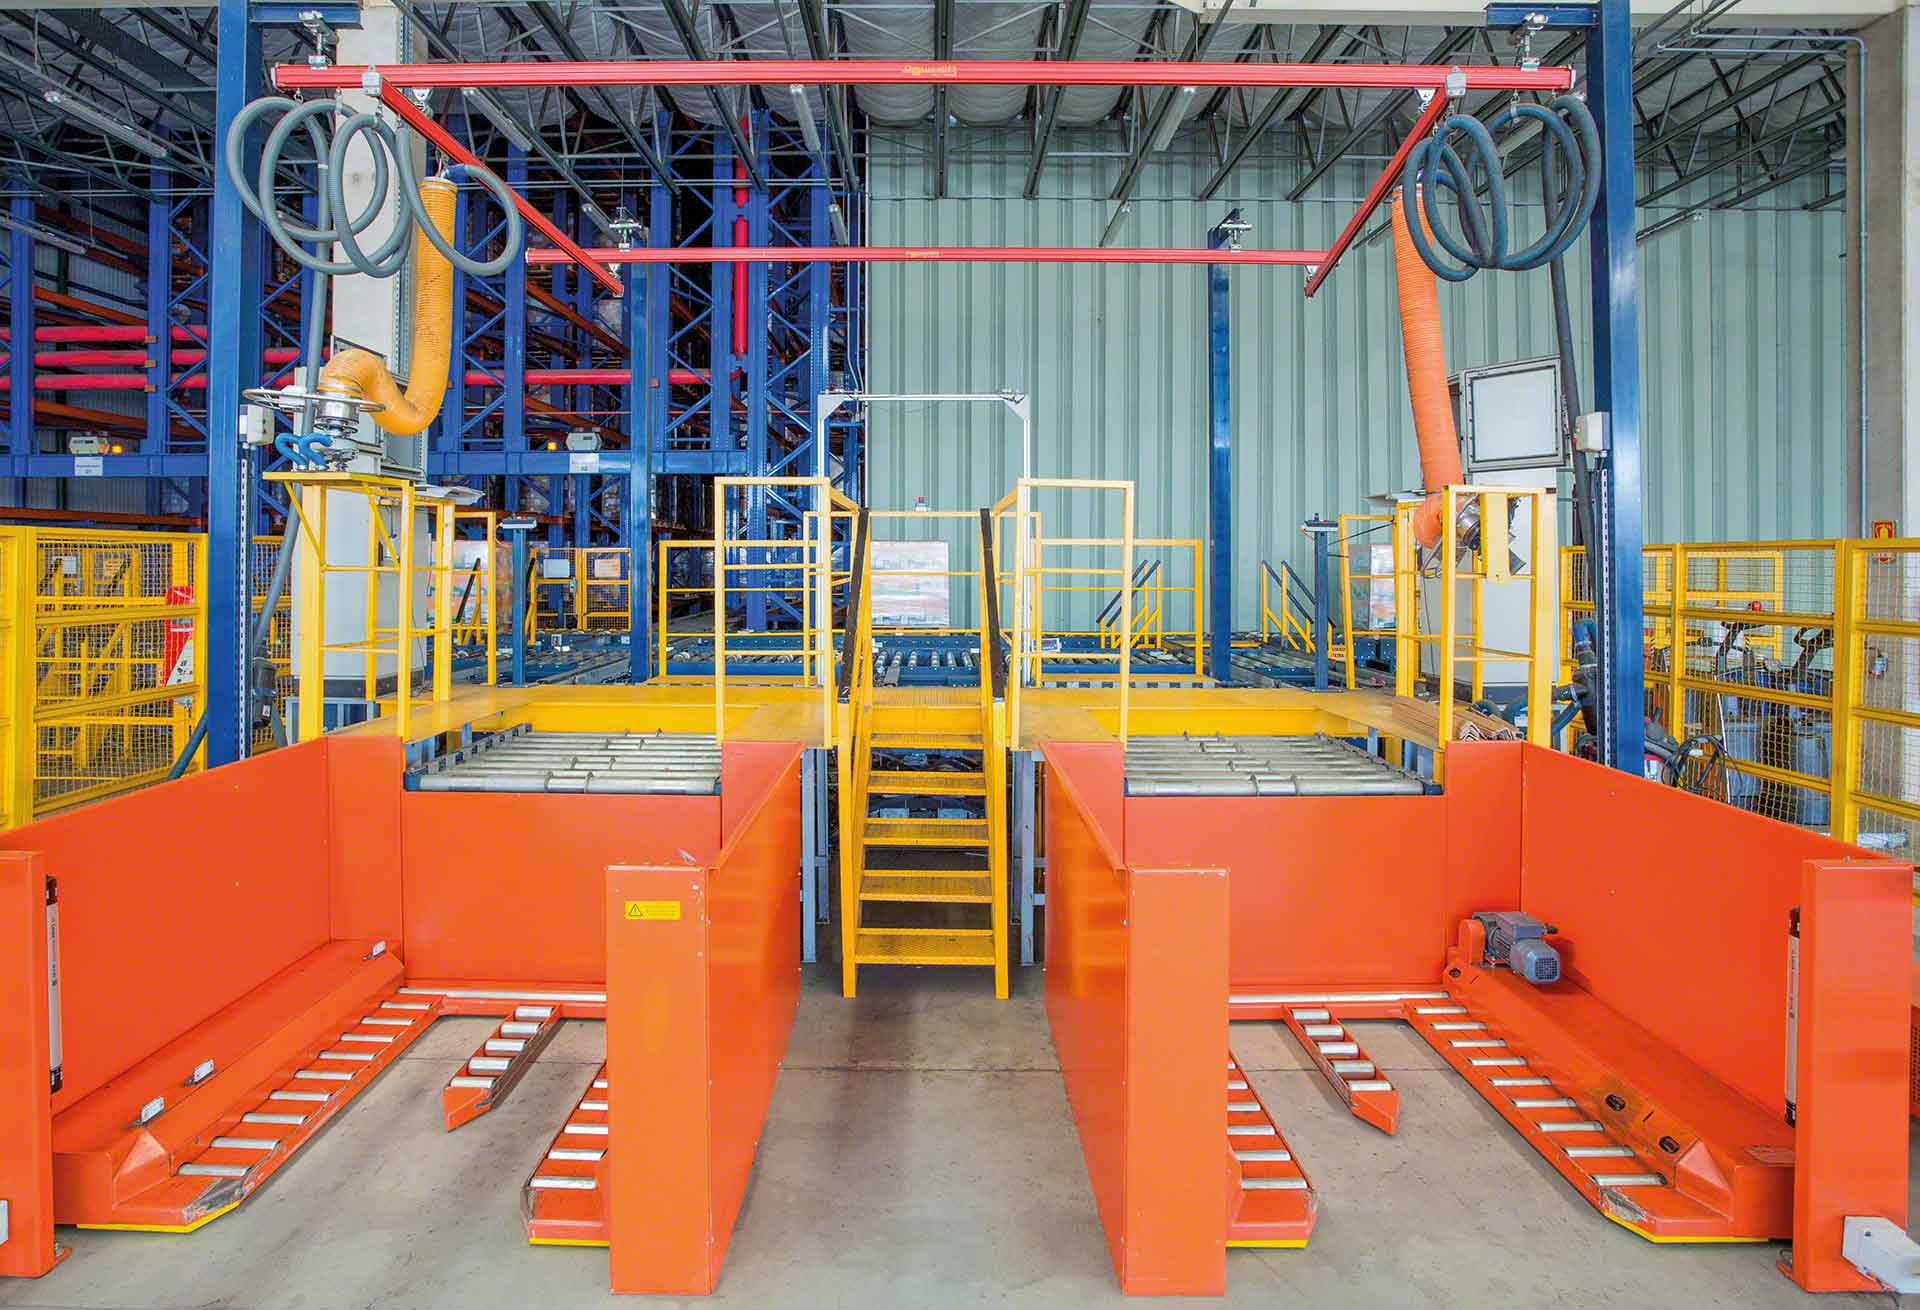 The picking area can be equipped with mechanical arms to automate pallet assembly